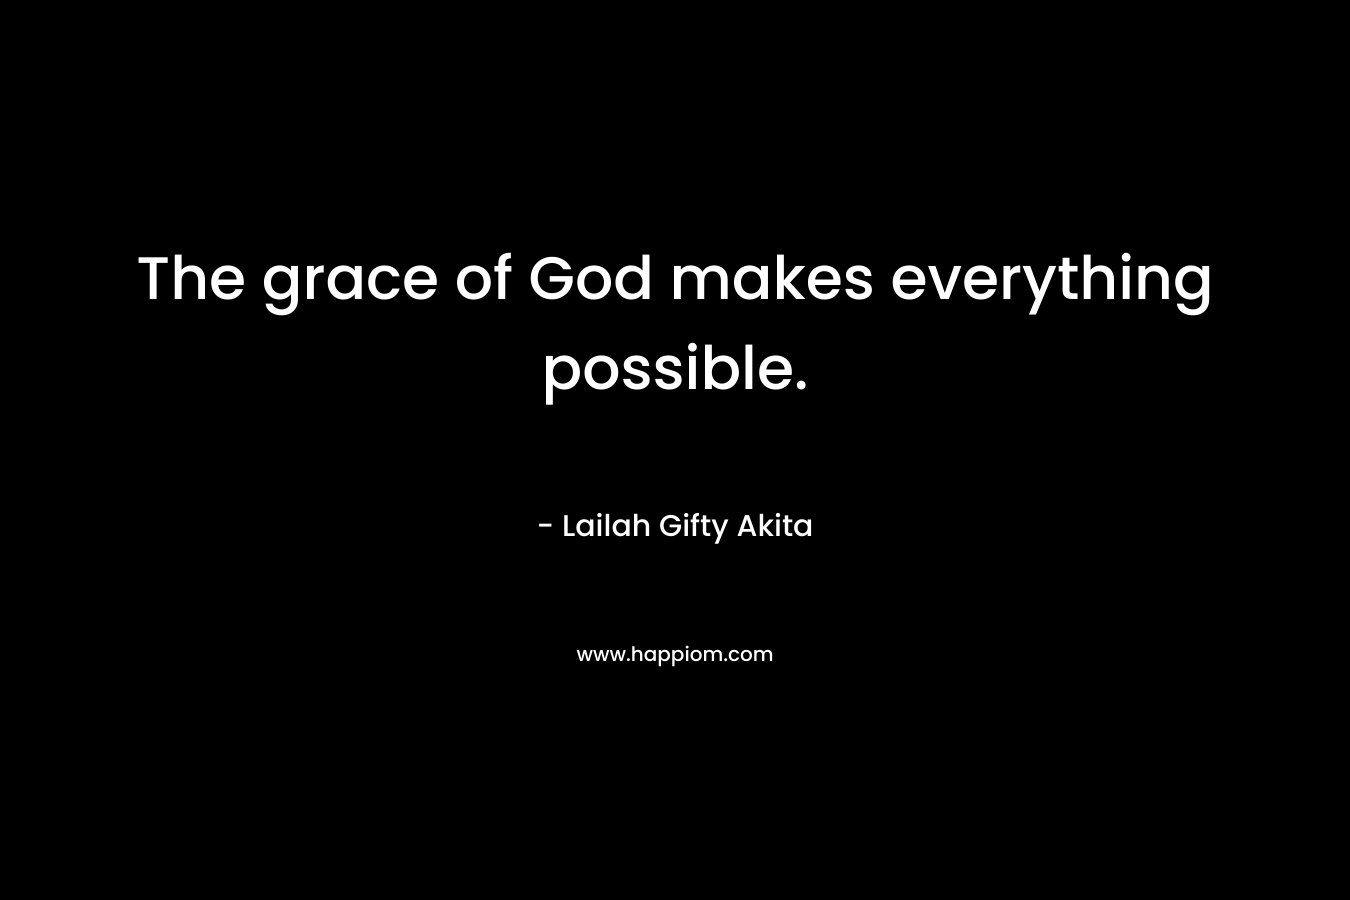 The grace of God makes everything possible.